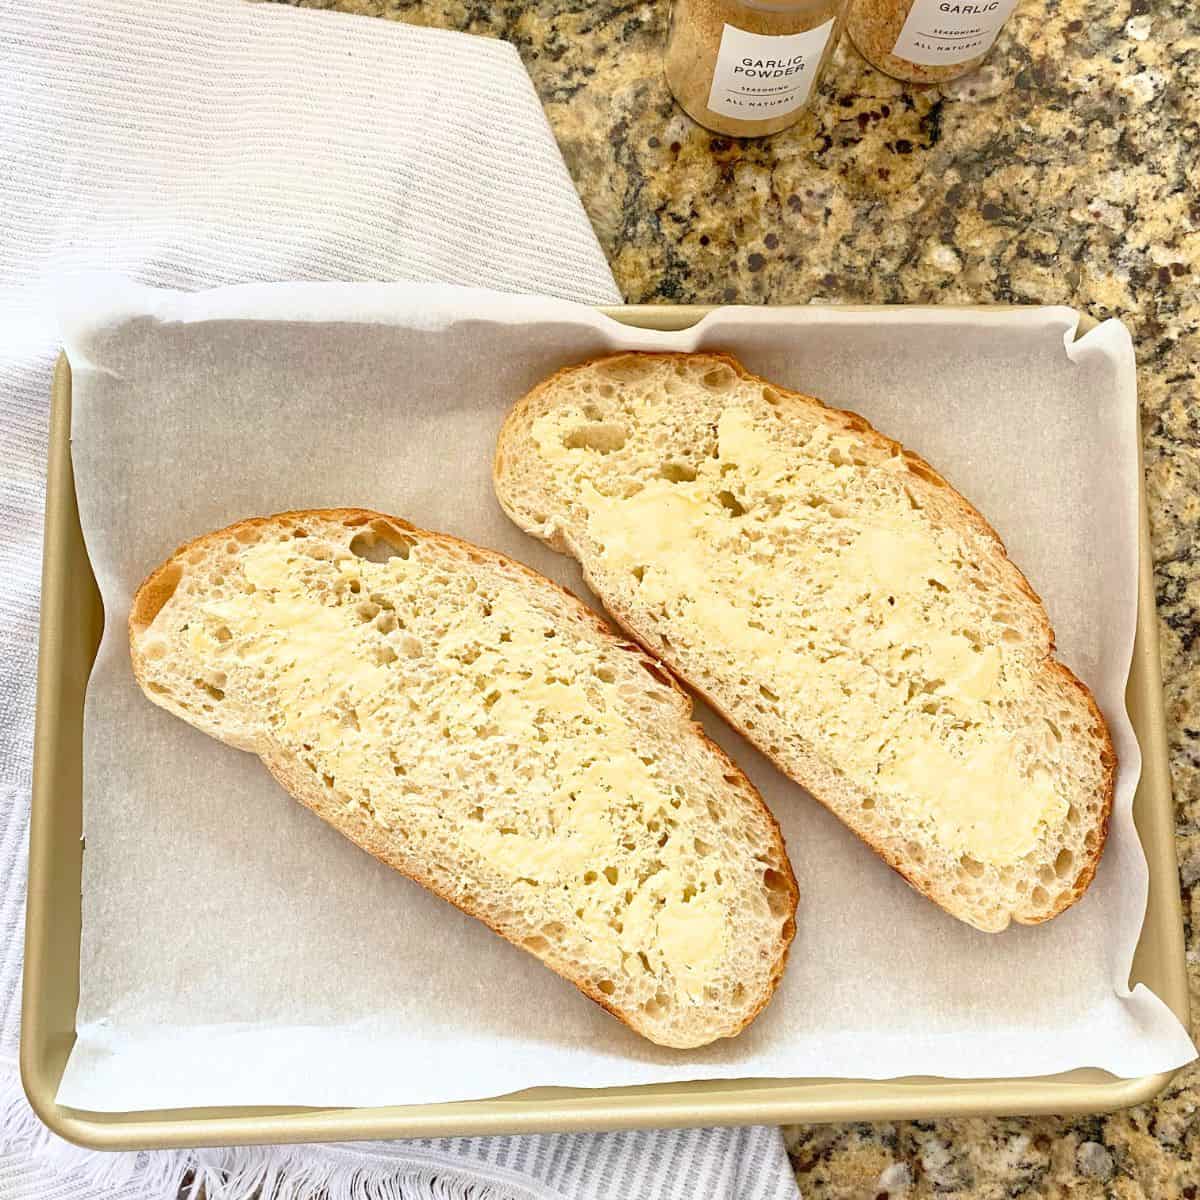 Buttered and garlic powdered sourdough bread on a gold baking sheet pan, waiting to be roasted in the oven